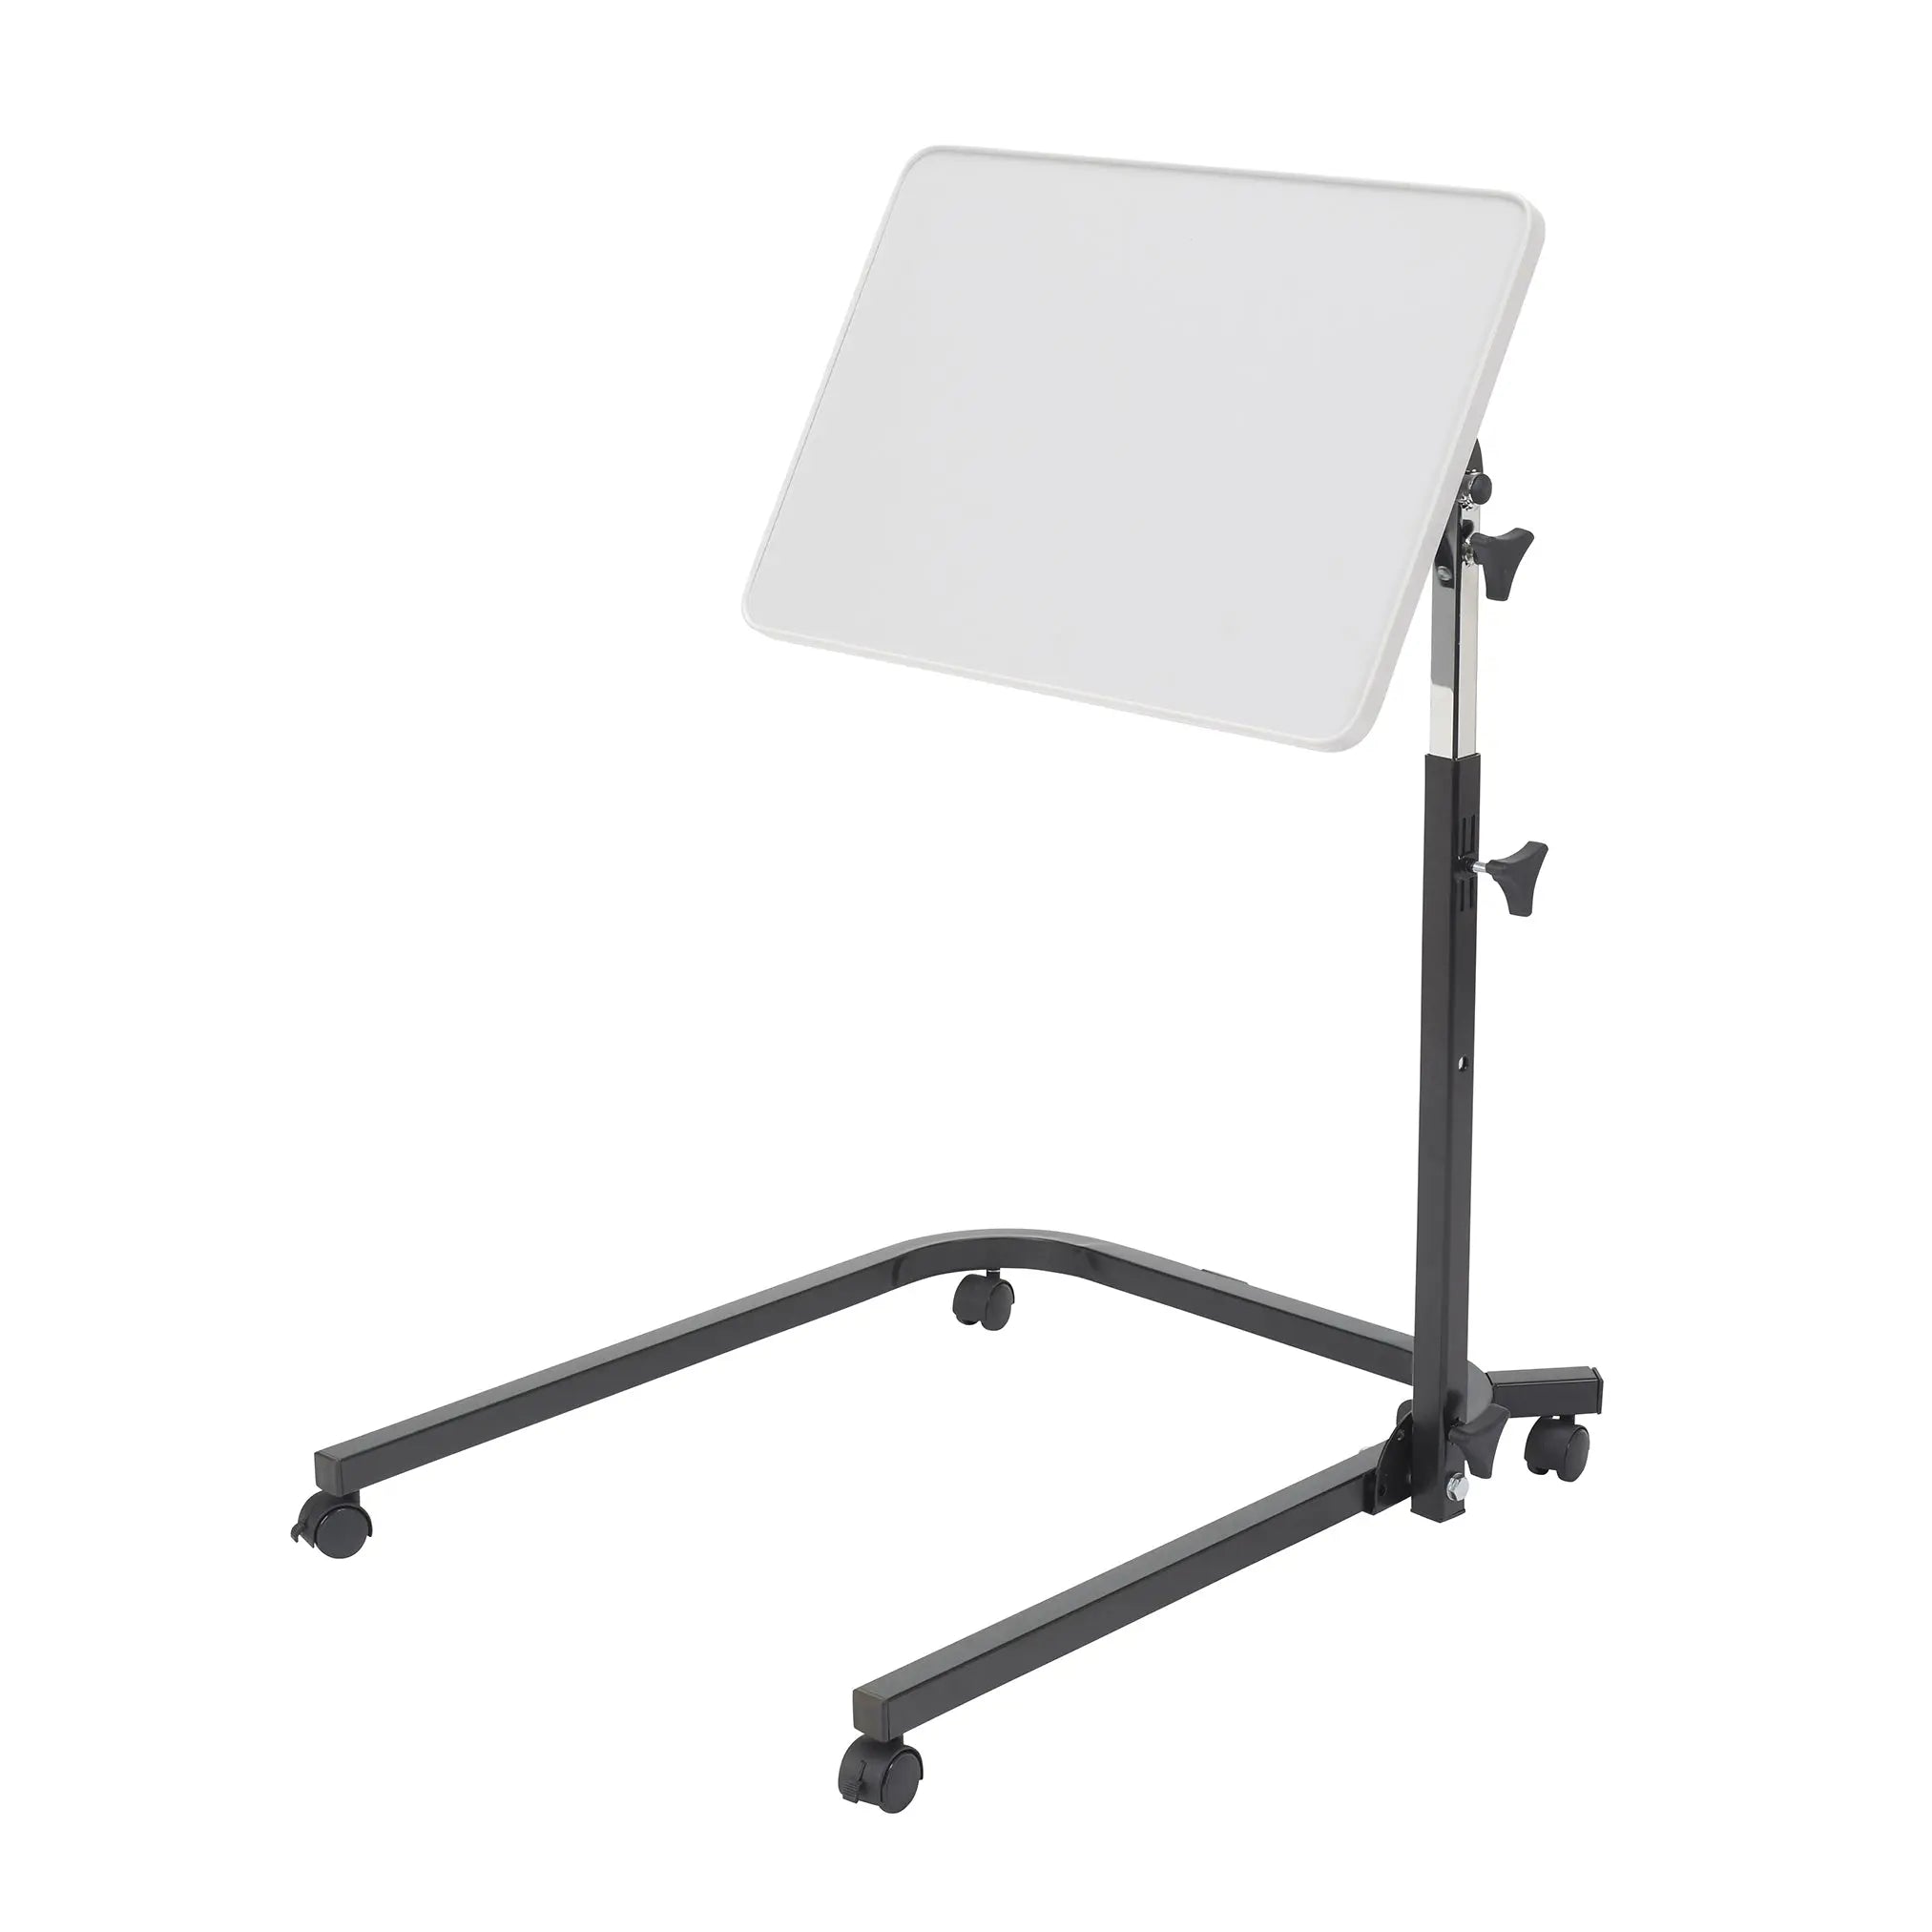 Pivot and Tilt Adjustable Overbed Table Tray